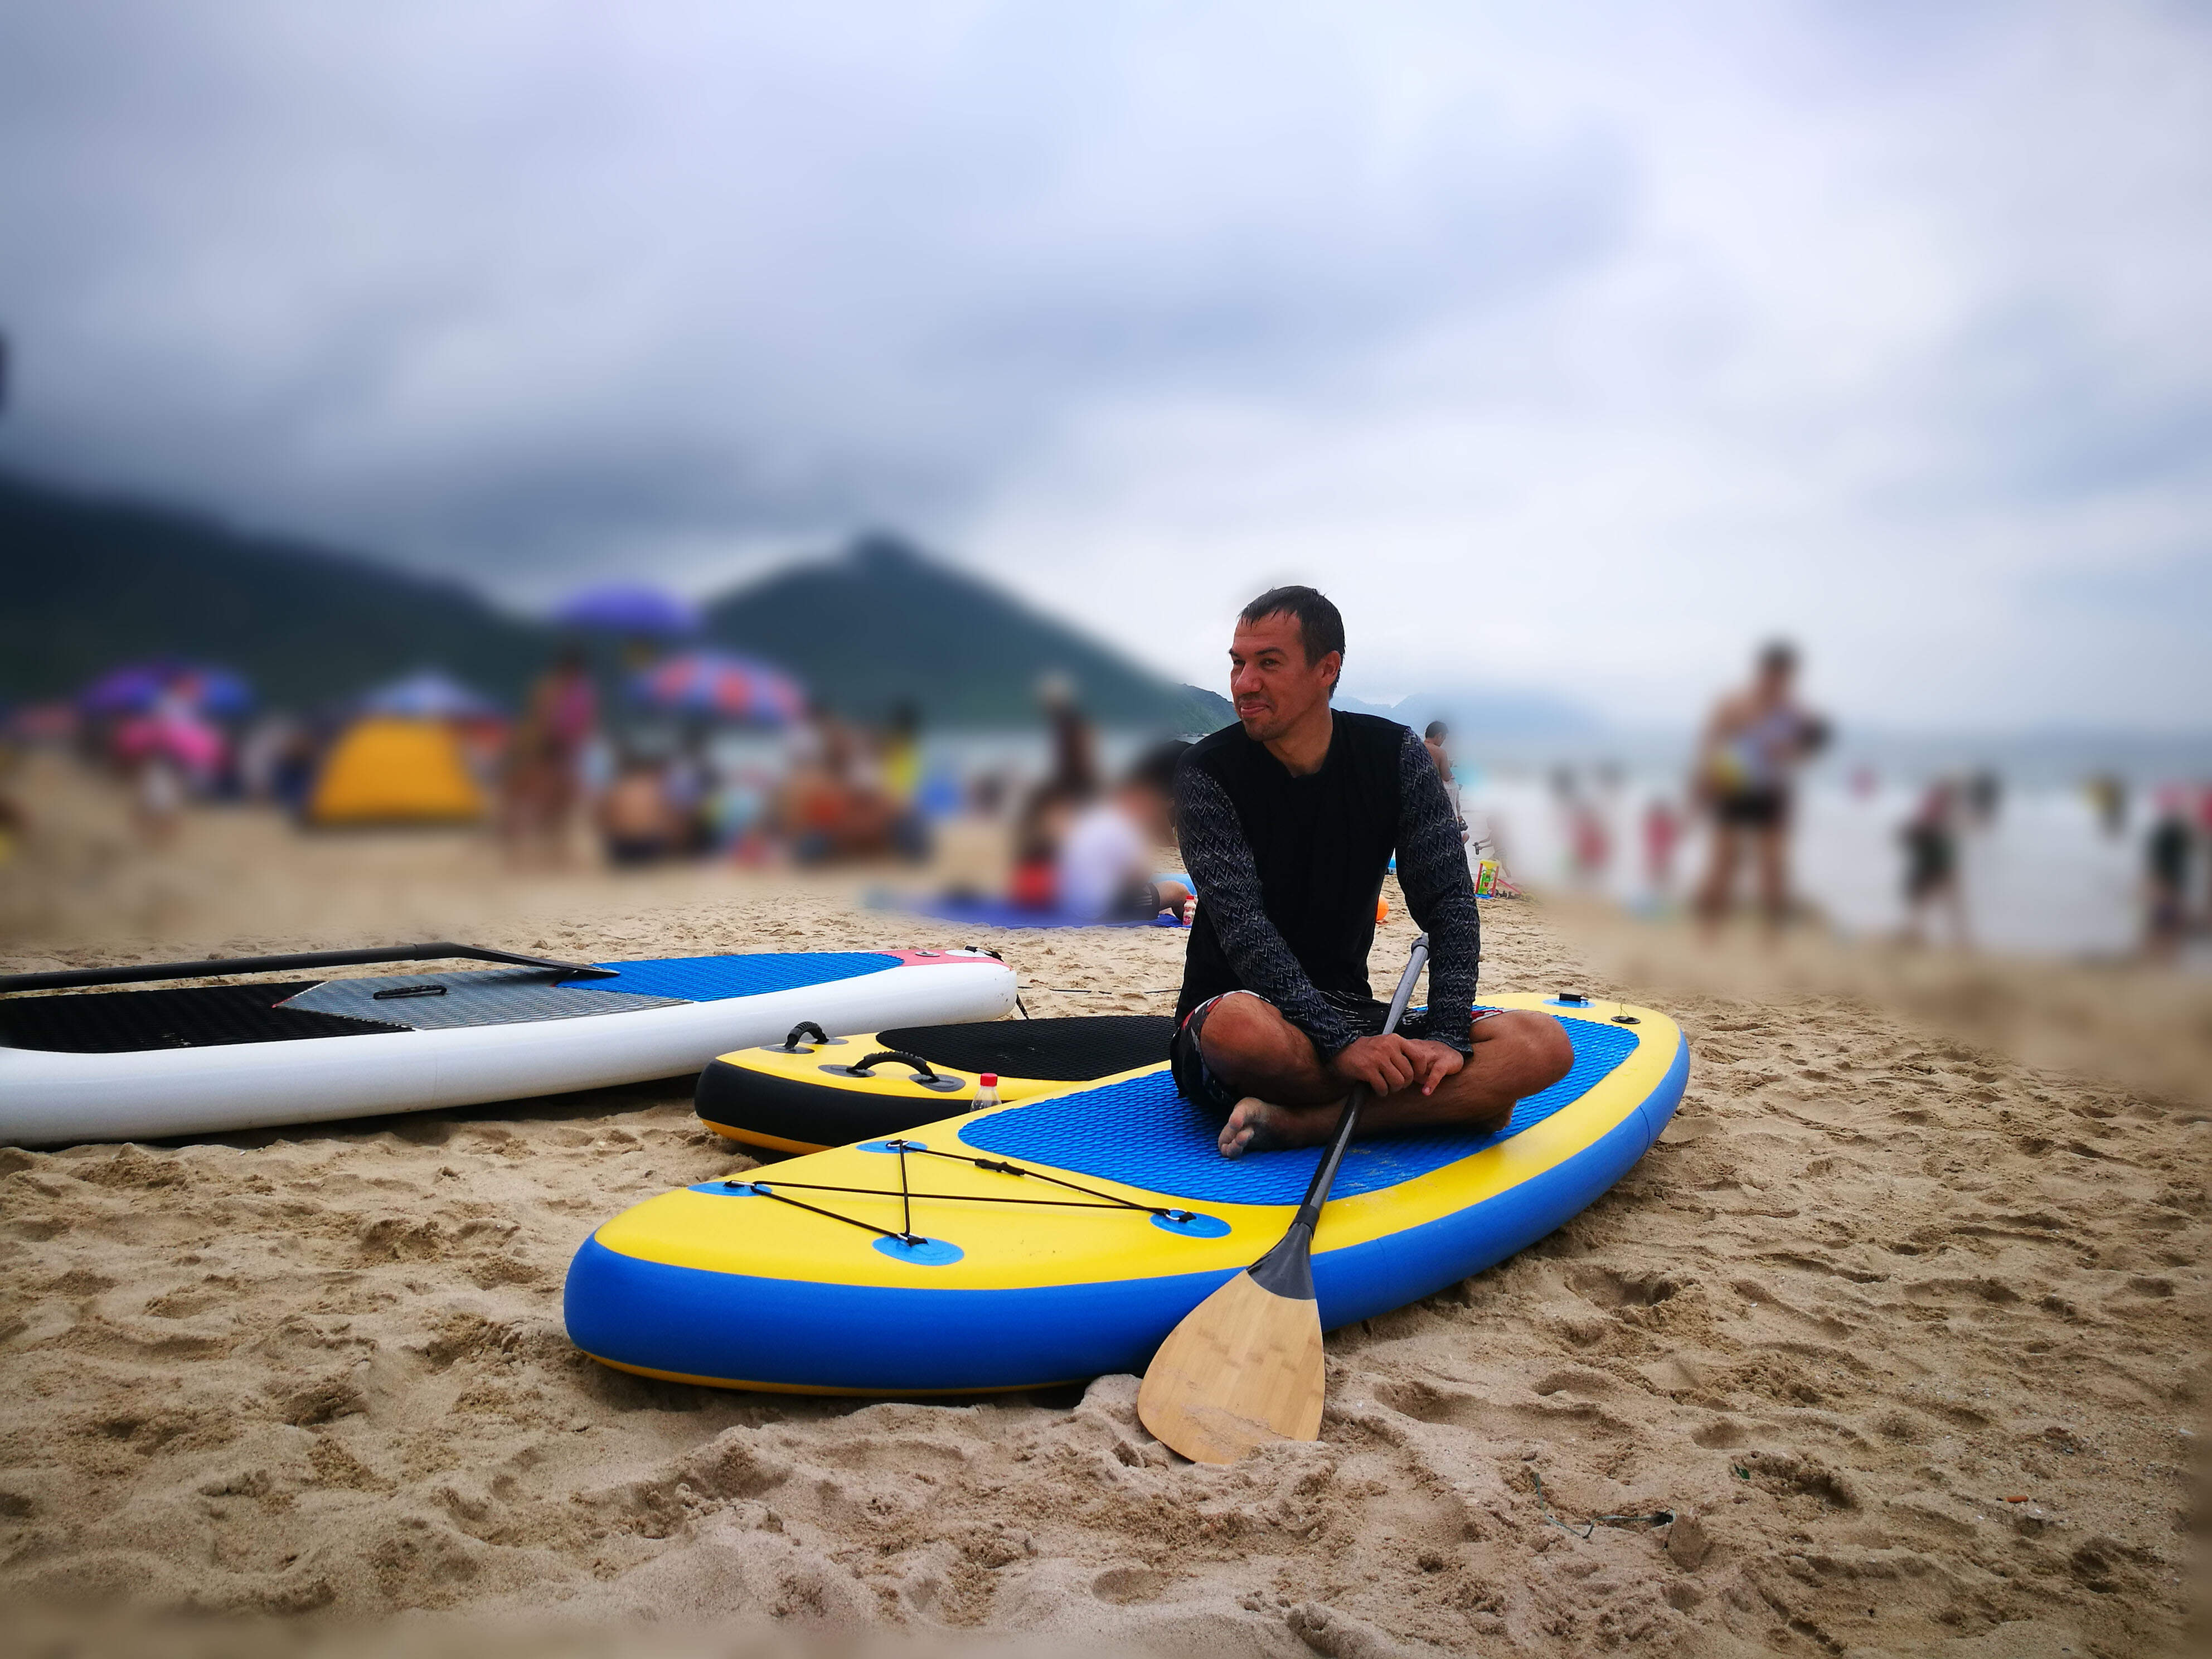 Tips for inflatable stand up paddle boarding beginners